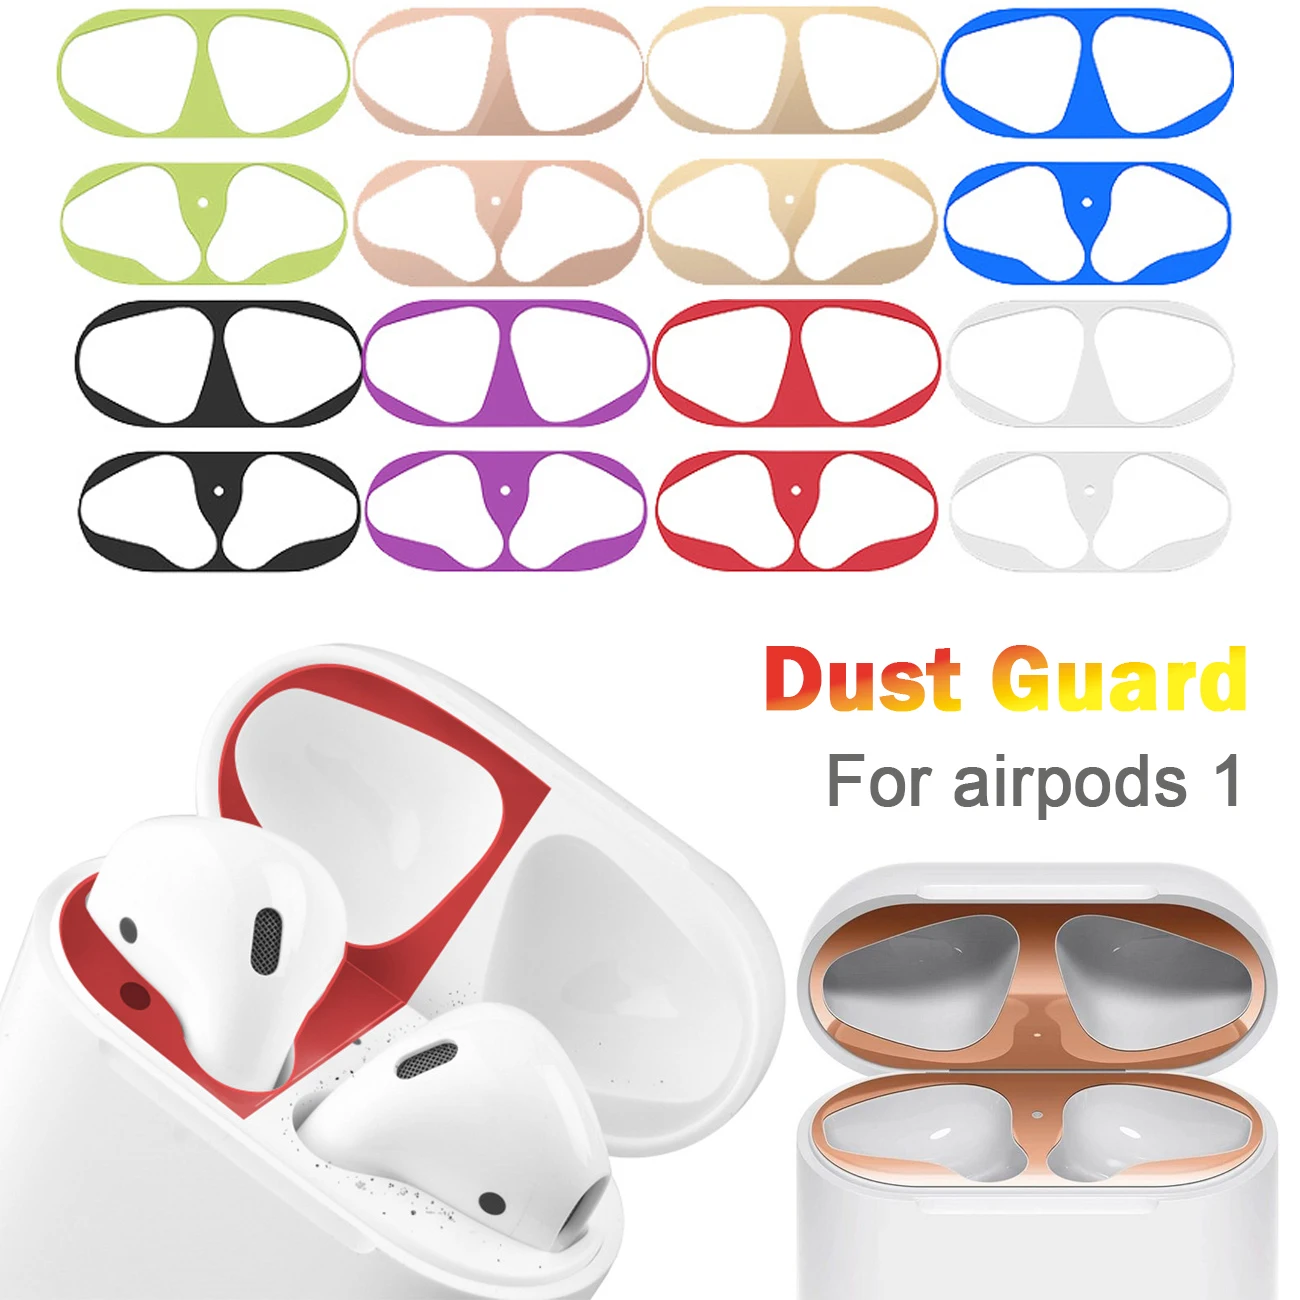 Dust Guard Ultra Thin Skin Protective Cover Metal Film Sticker Iron Shavings Shell Dust Guard For AirPods 1 Skin Earphones Pouch